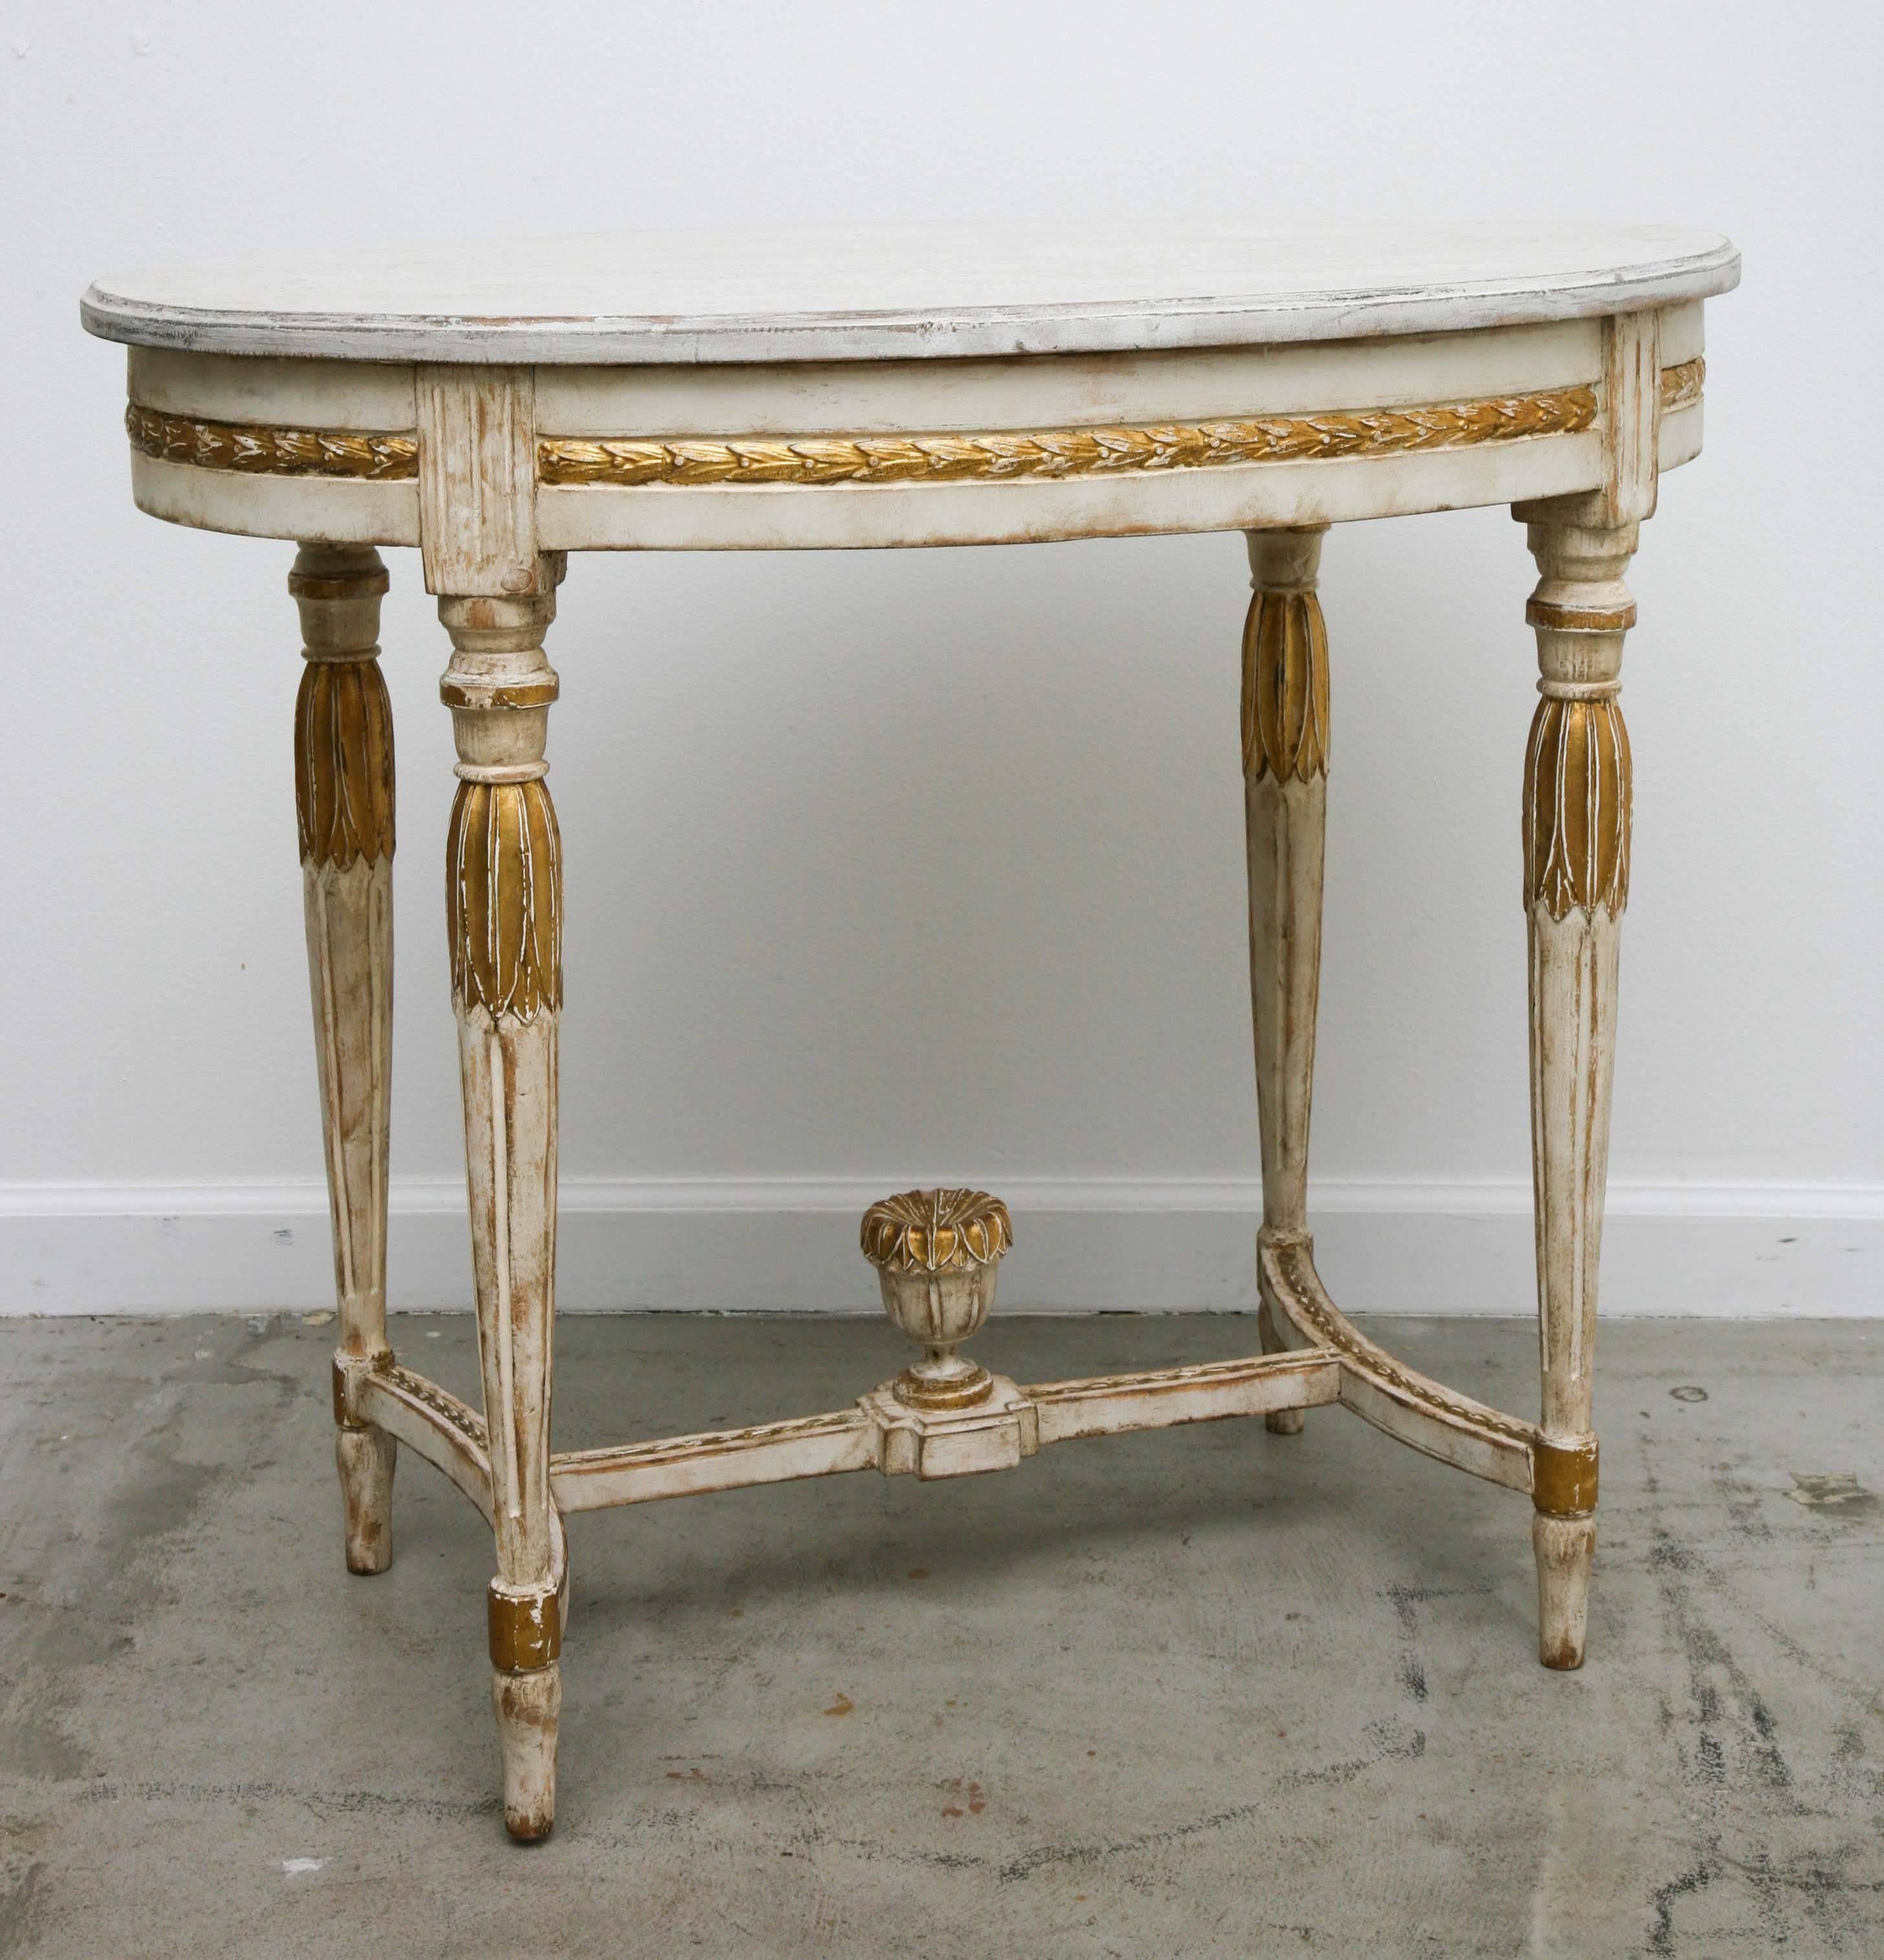 Antique Swedish Period Oval Table, Painted and Gilt Finish, 19th Century 2